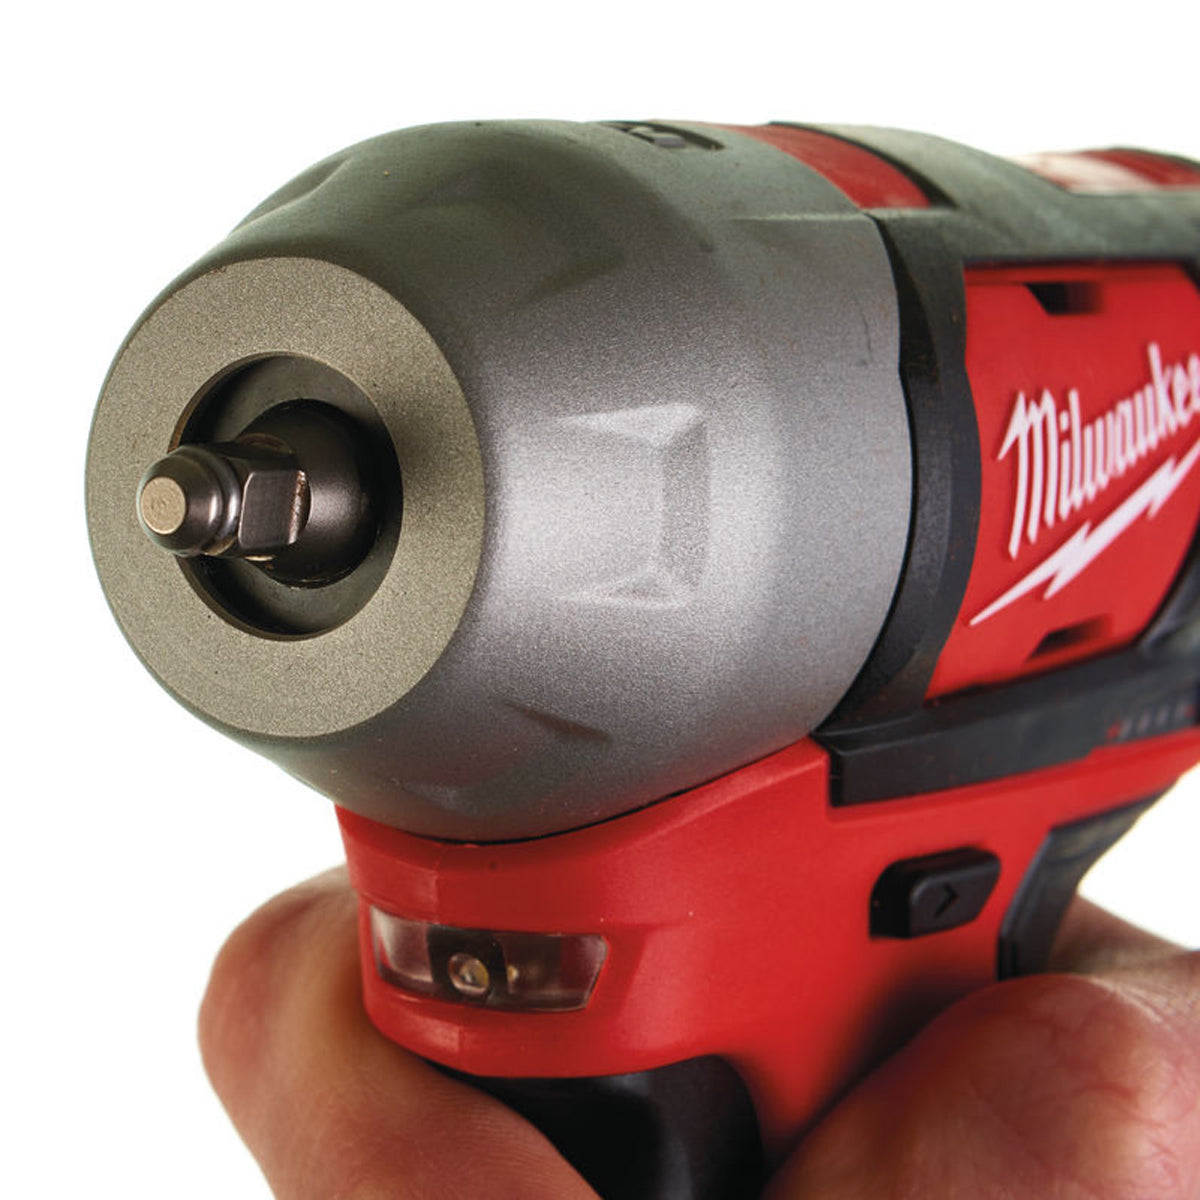 Milwaukee M12BIW14-202C Sub Compact 12V 1/4in Impact Wrench Kit With 2 x 2.0Ah Batteries & Charger in Case 4933443897